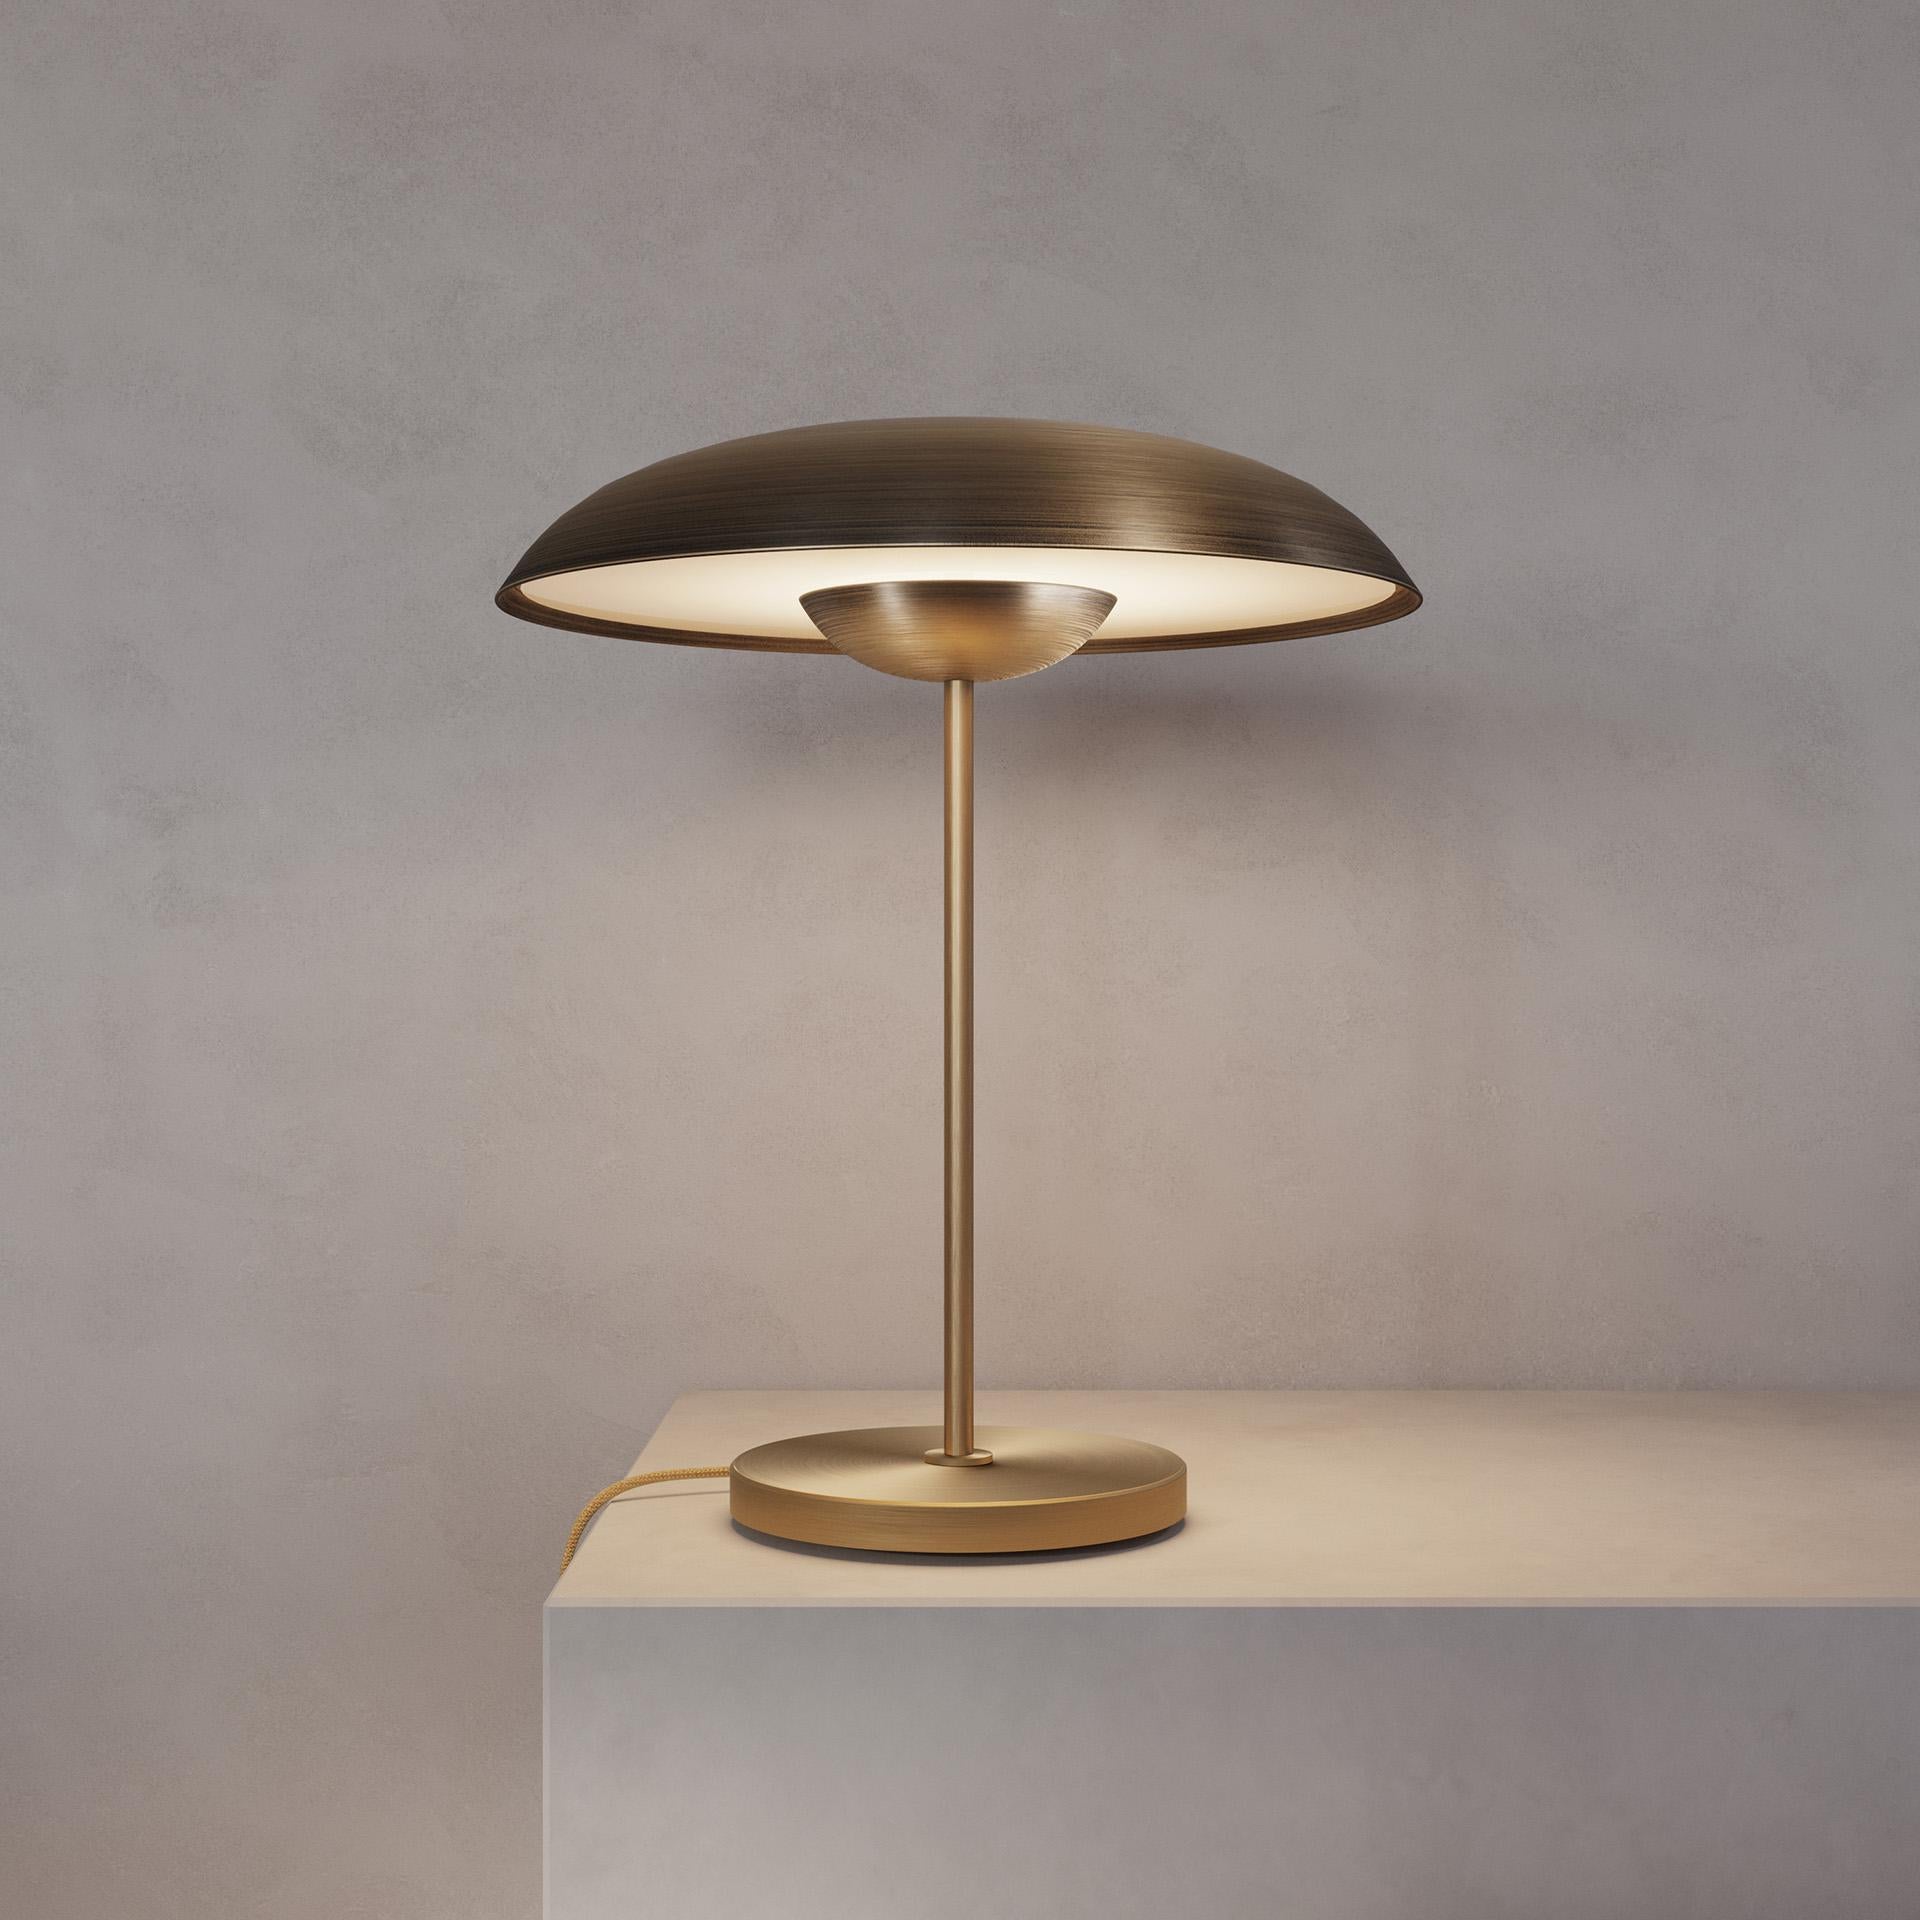 Contemporary Solstice Ore Table Lamp by Atelier001